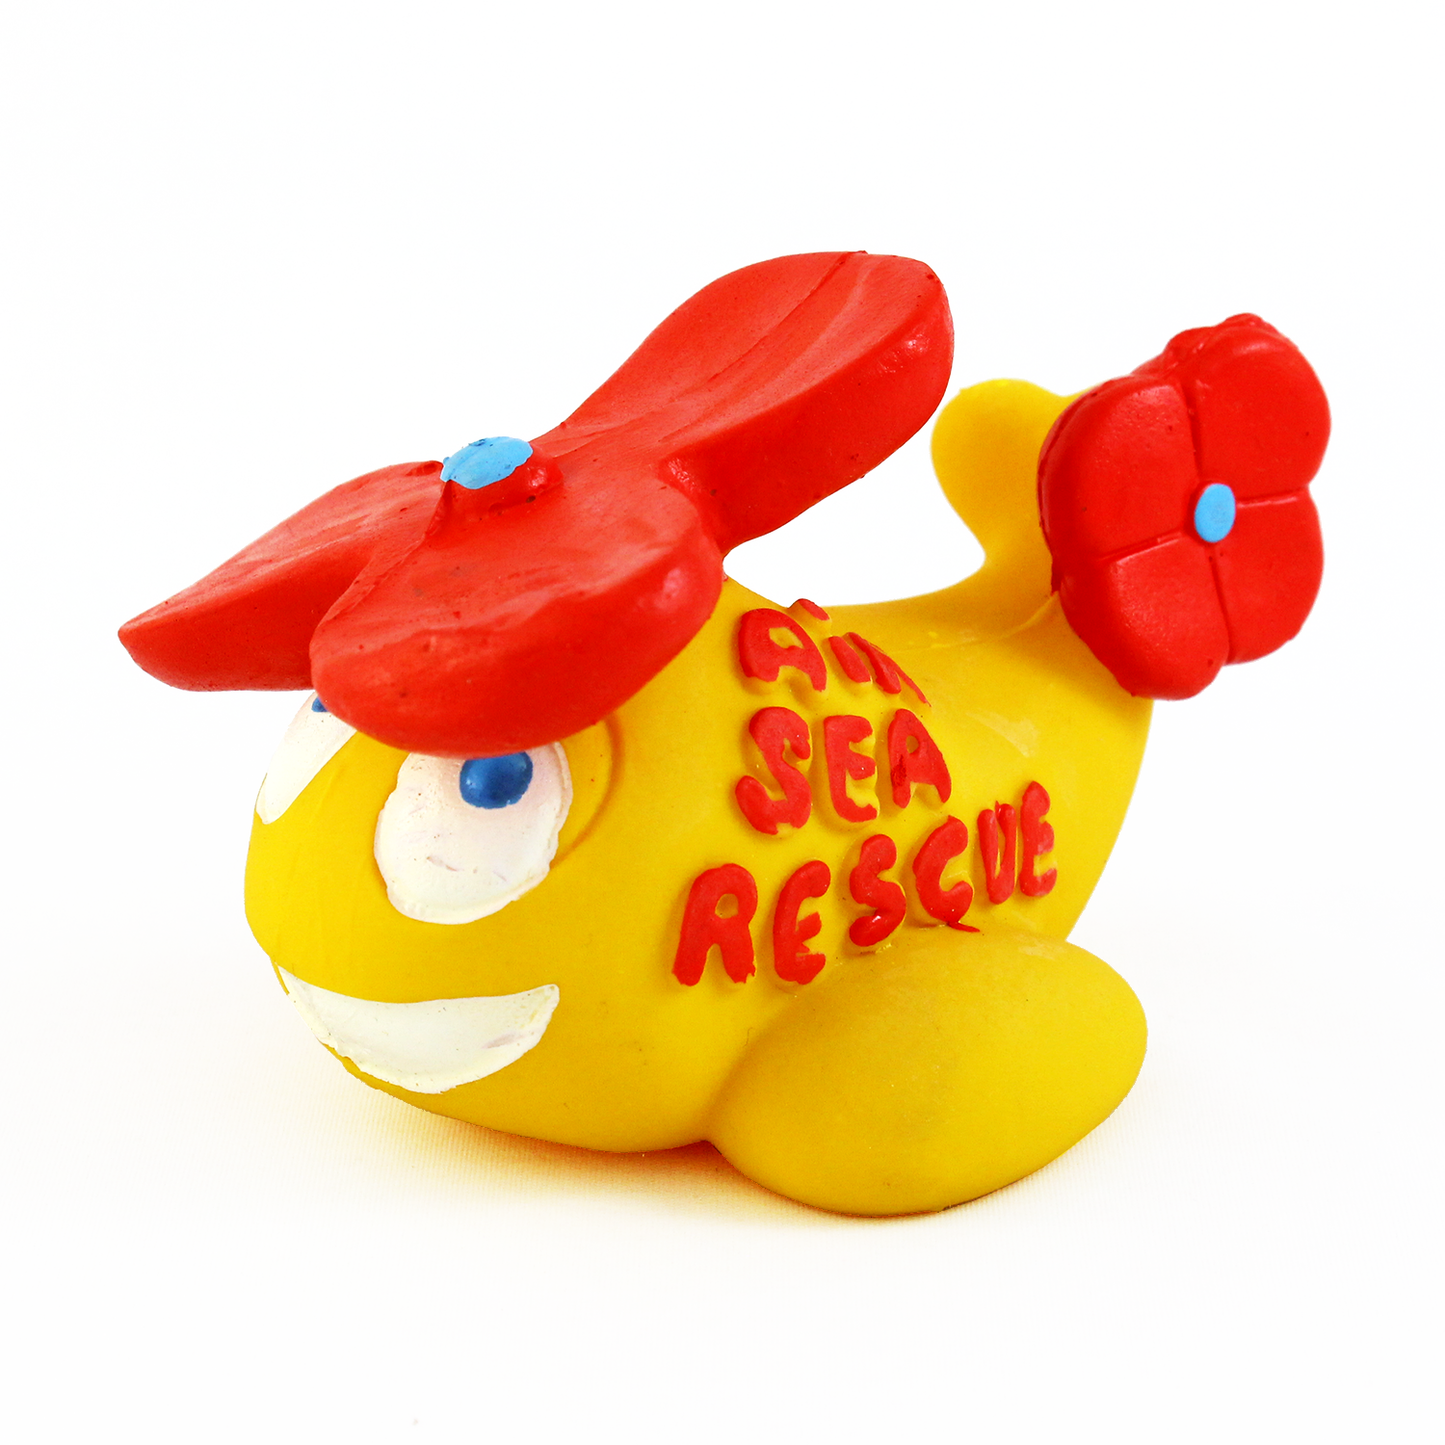 Lanco Natural Rubber Bath Toy - Helicopter Teo